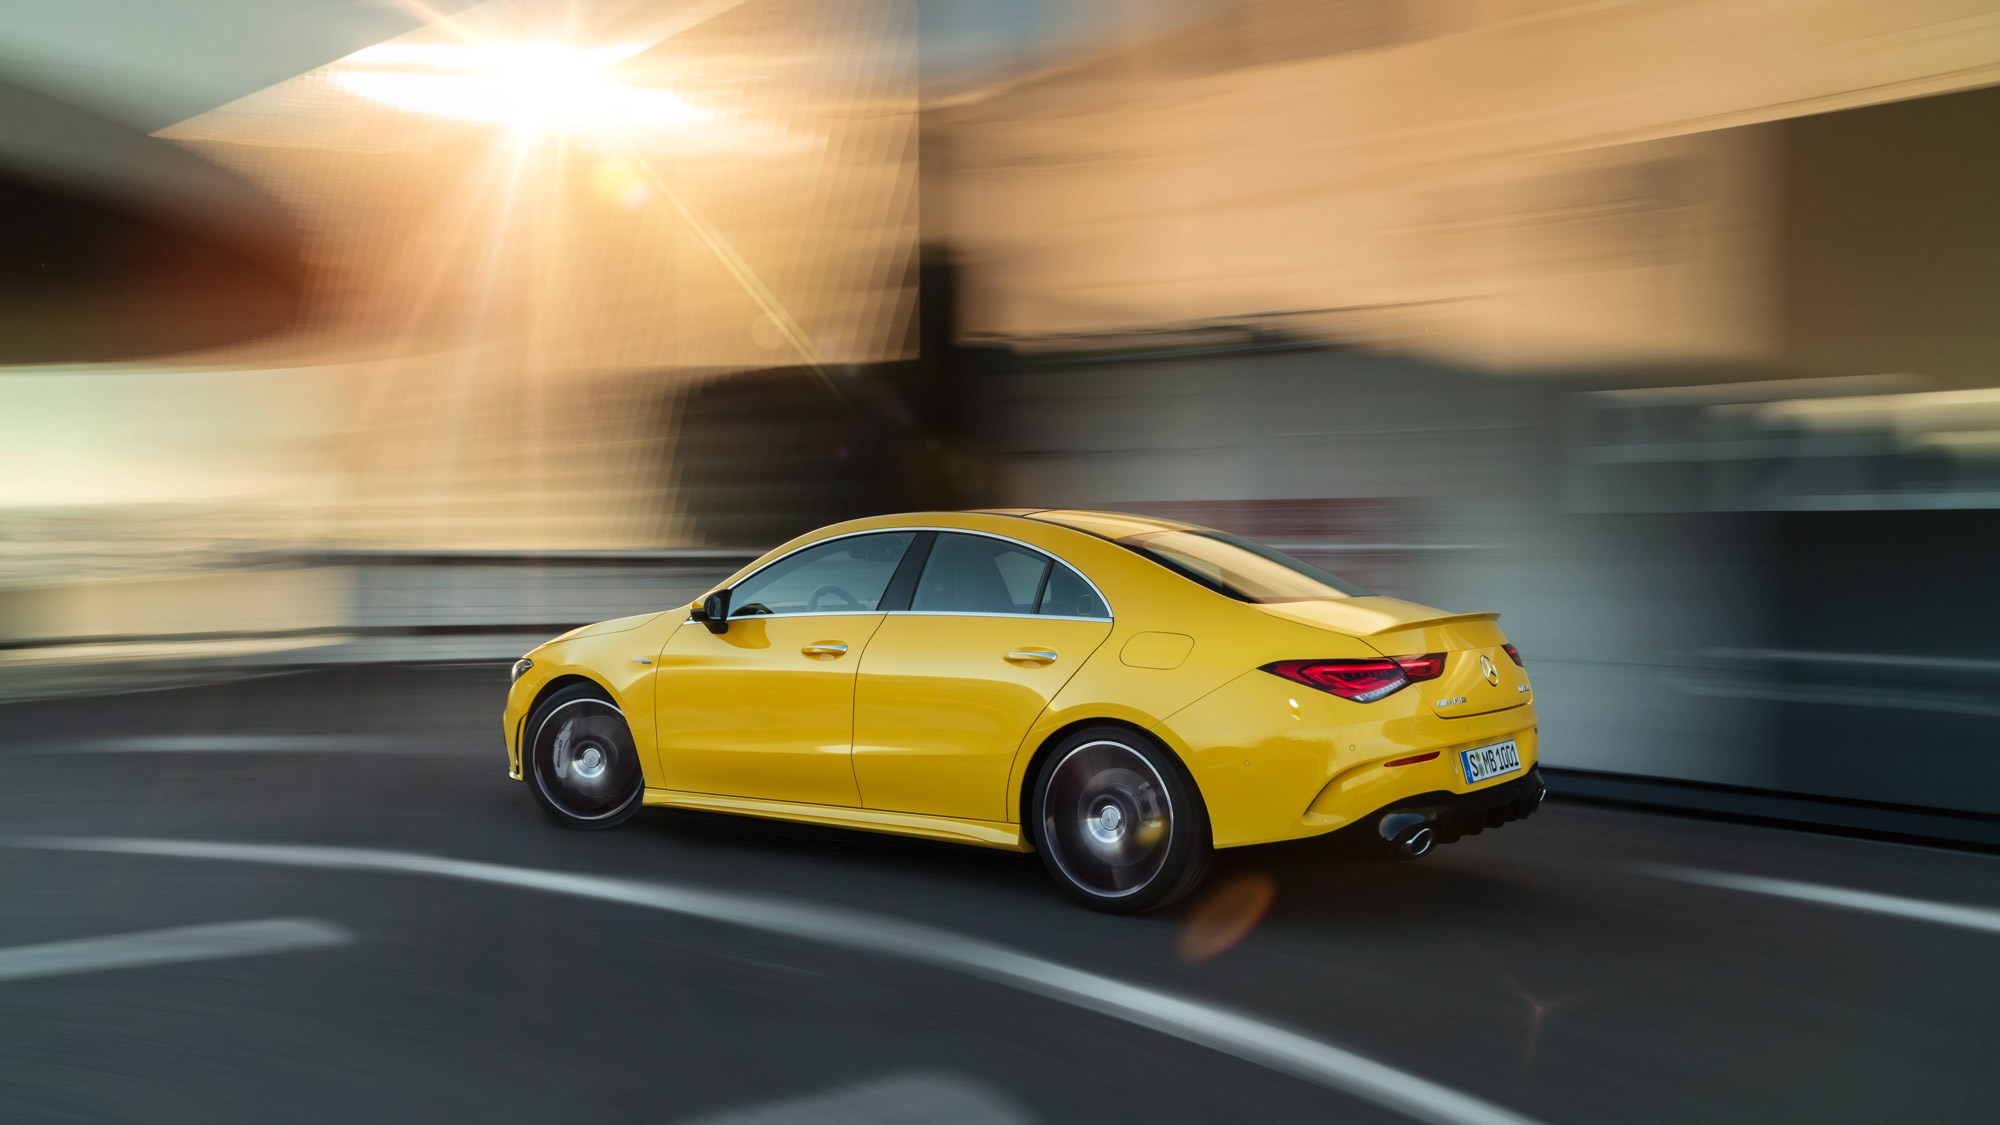 The Compact CLA Coupe